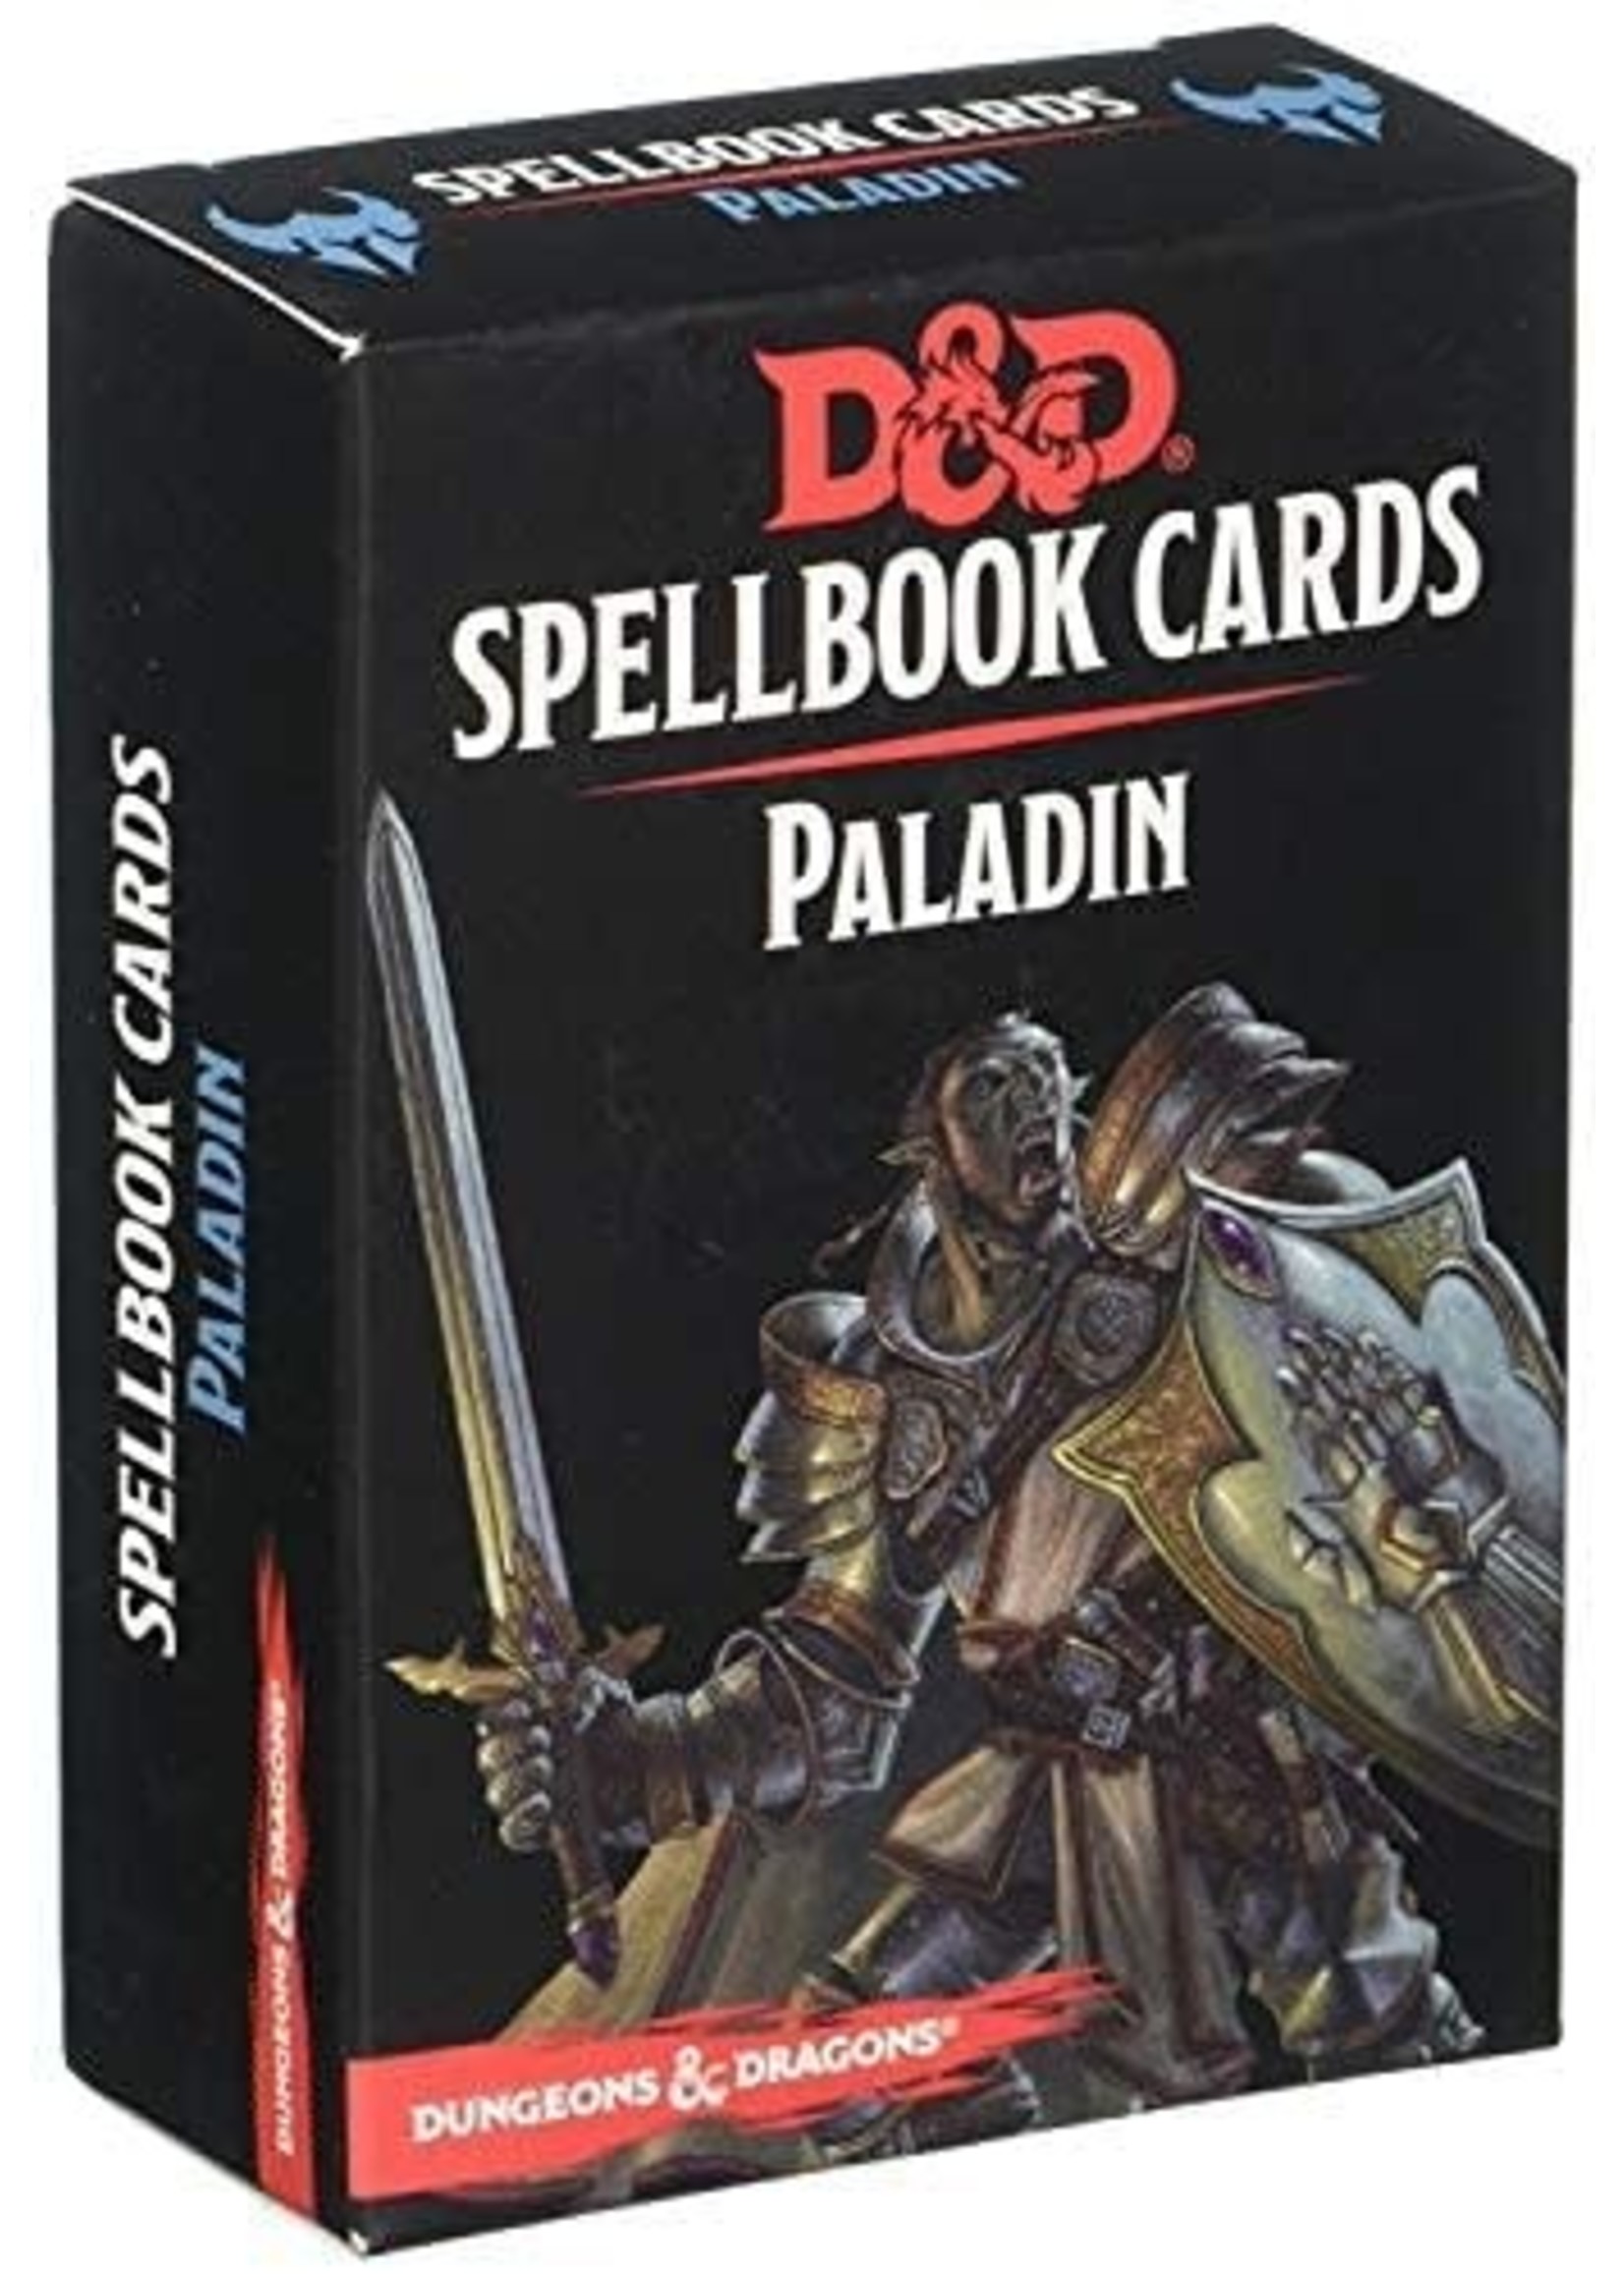 Dungeons & Dragons D&D Spellbook card - Paladin